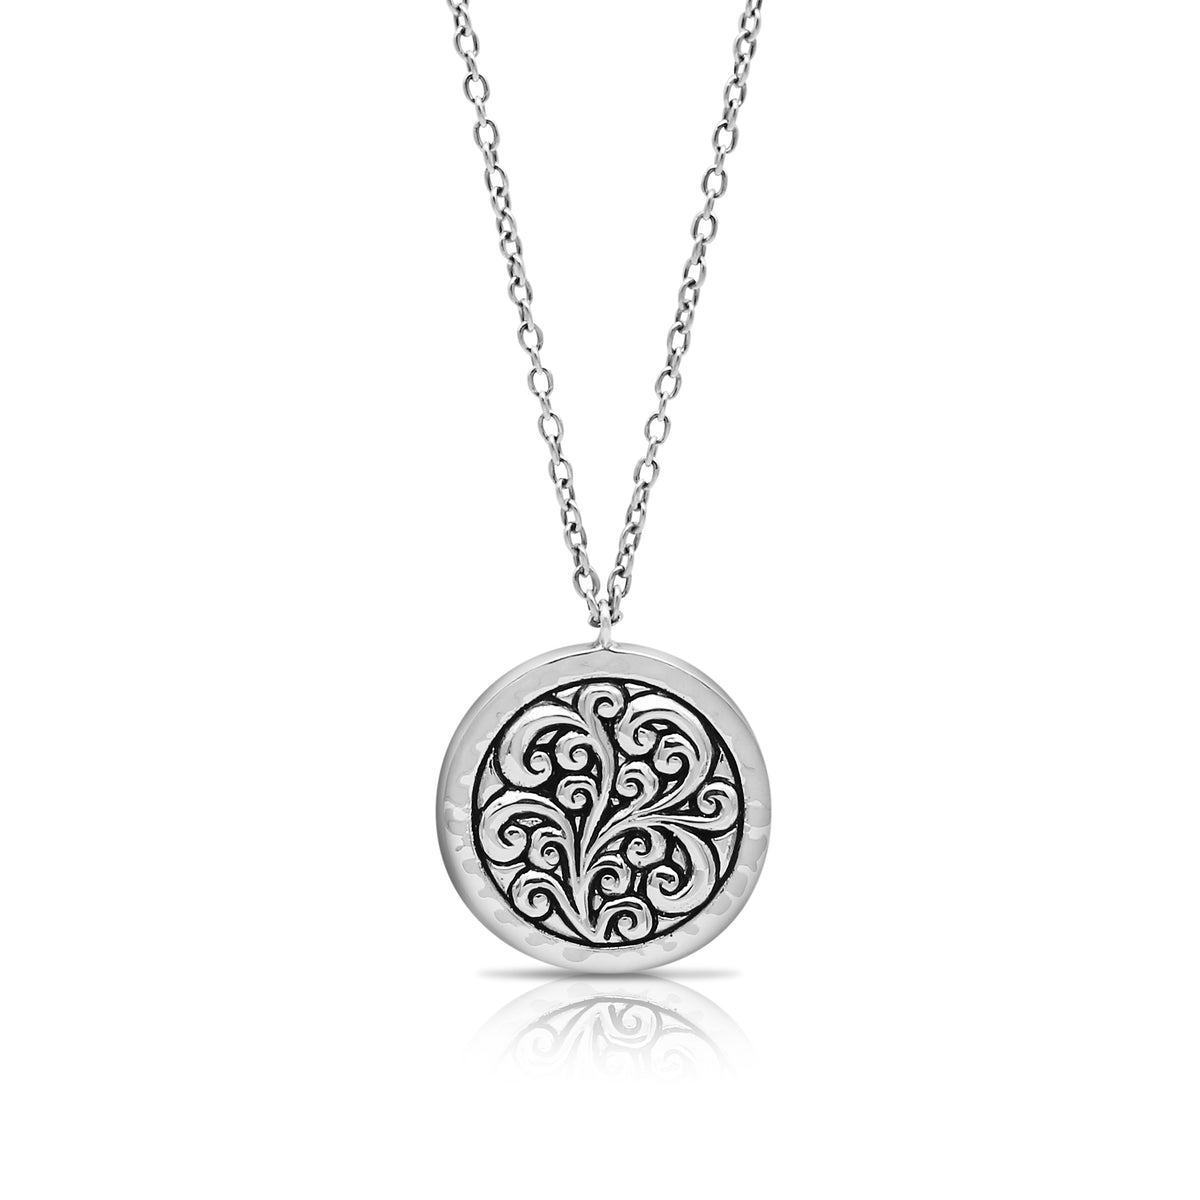 LH Scroll Repousse Round Pendant (23mm) Necklace 18" - 19" Chain